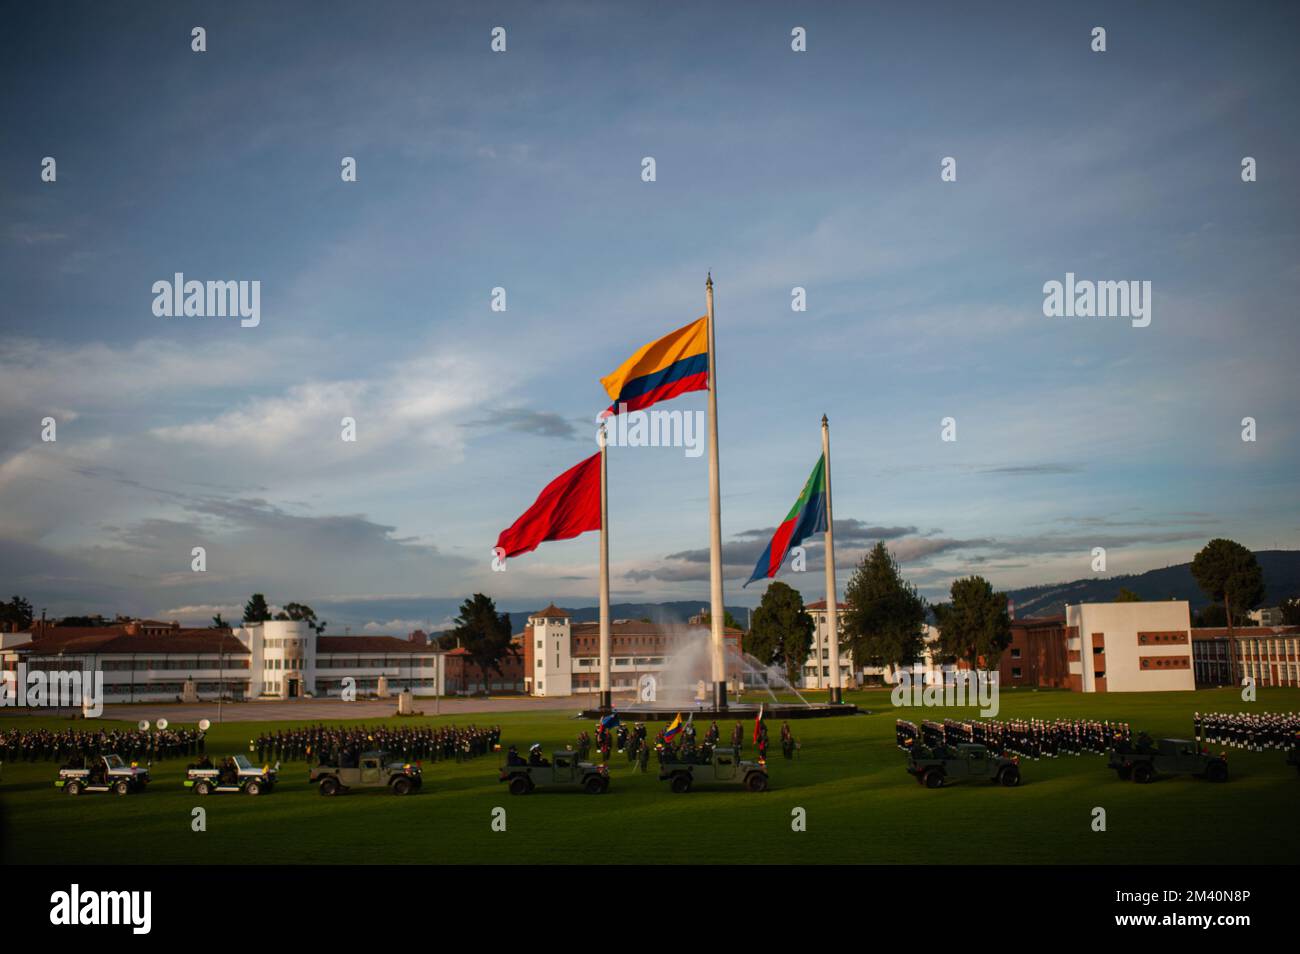 Bogota, Colombia. 17th Dec, 2022. A general view during the promotion ceremony of new Generals and Admirals of the Police and Military Forces at the Jose Maria Cordova Military School in Bogota, Colombia on December 17, 2022. Photo by: S. Barros/Long Visual Press Credit: Long Visual Press/Alamy Live News Stock Photo